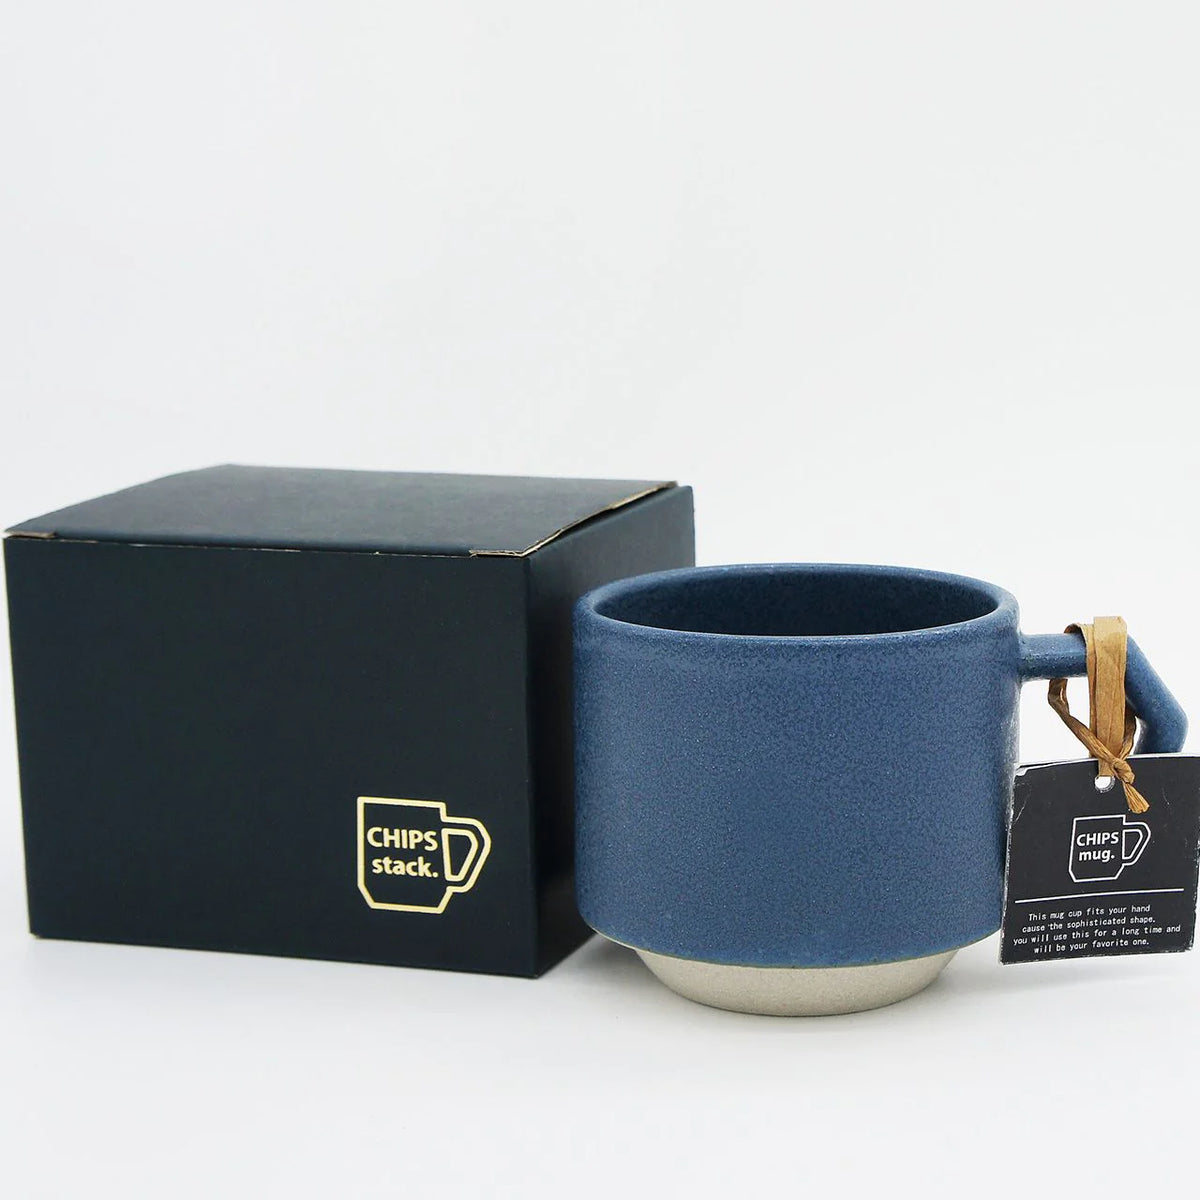 A CHIPS Inc. stackable blue ceramic mug with a tag in front of a box.